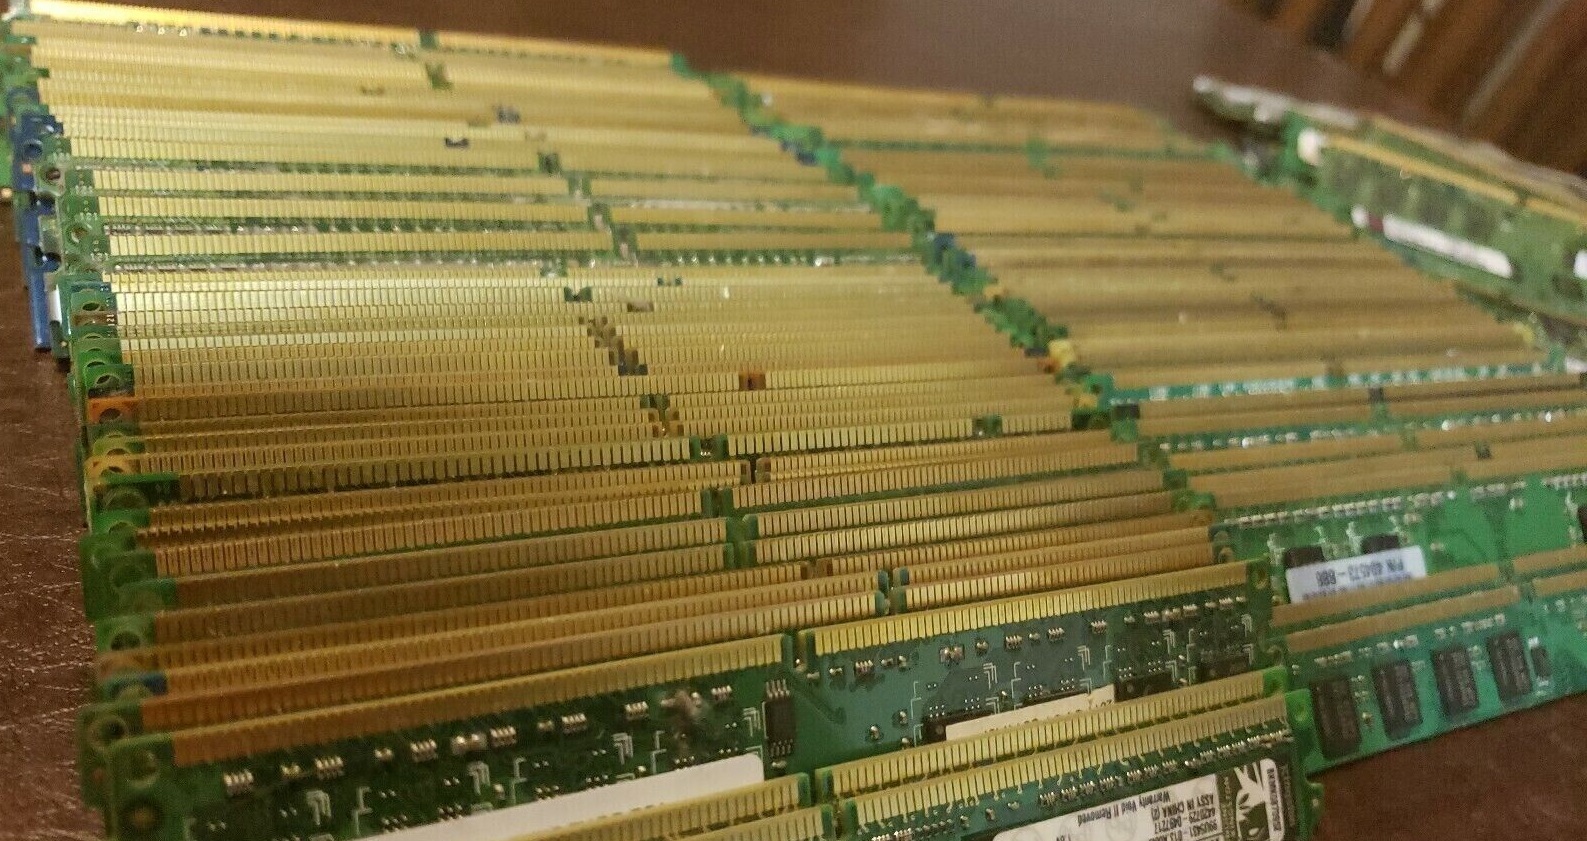 DDR4 and DDR3 RAM Goldfingers goldenrecycling